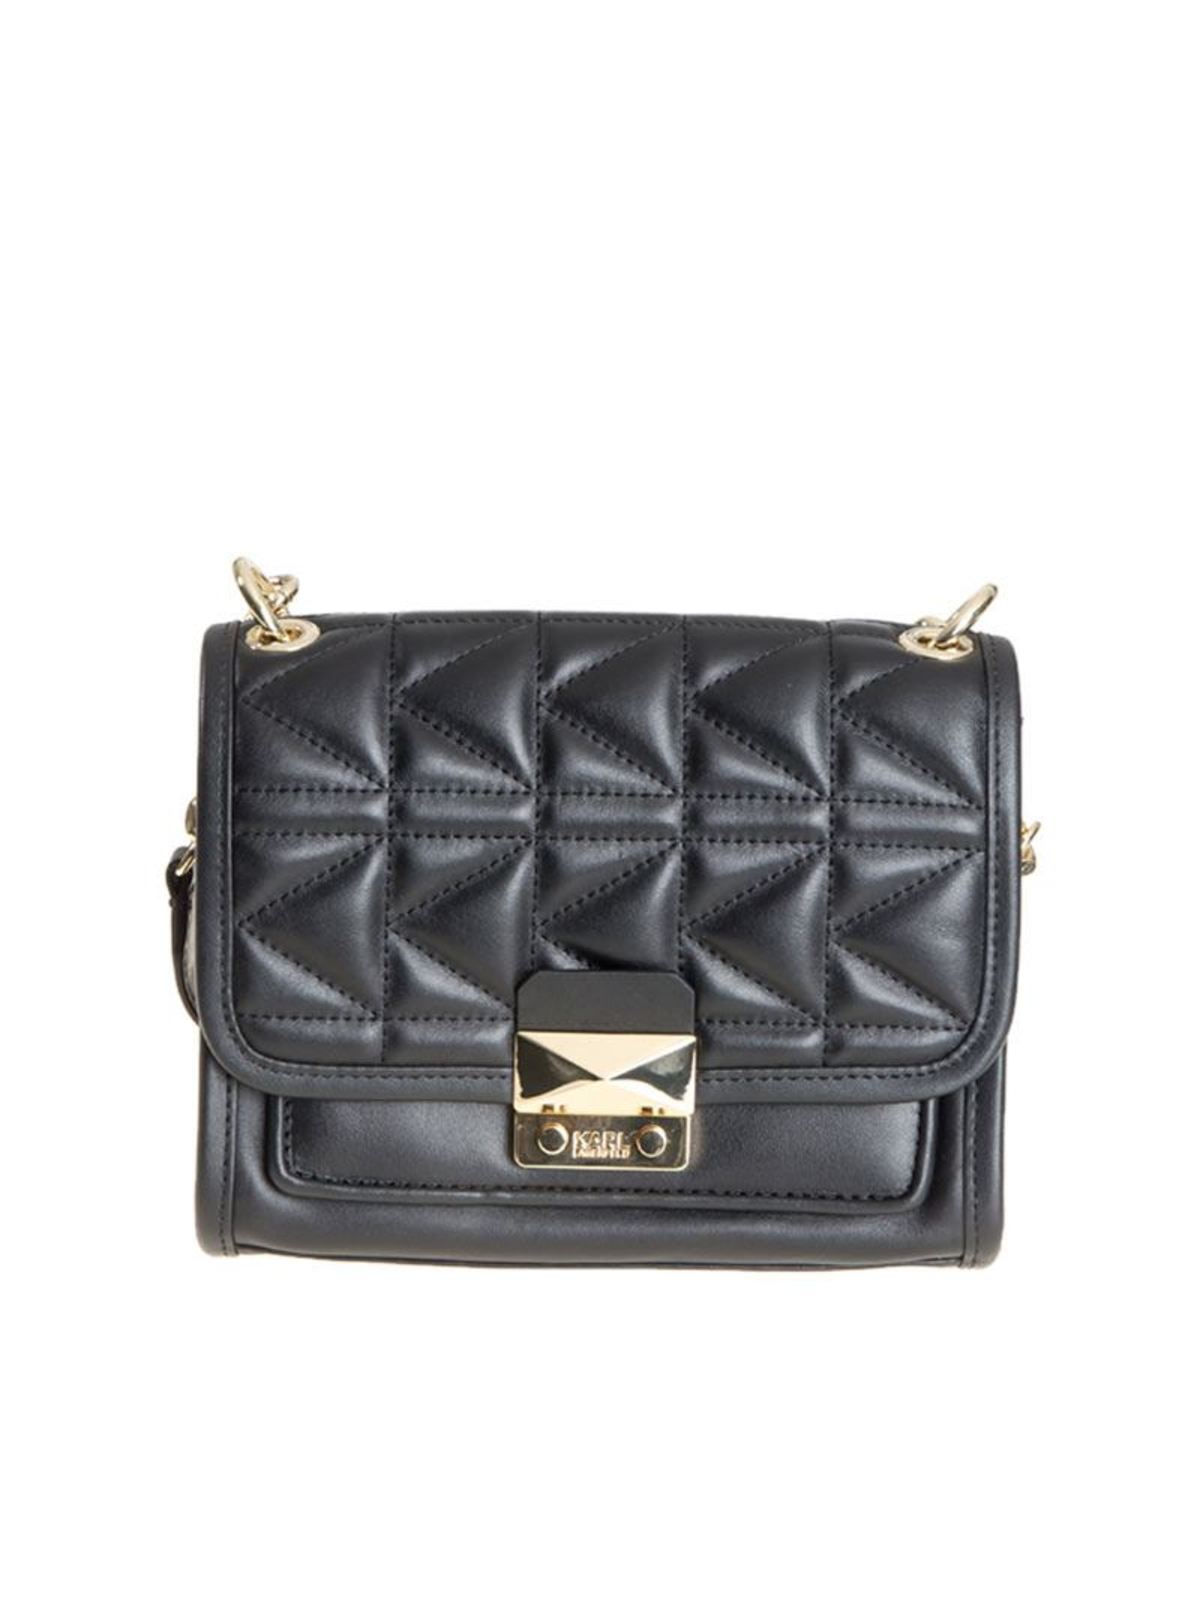 Karl Lagerfeld Quilted Leather Bag In Negro